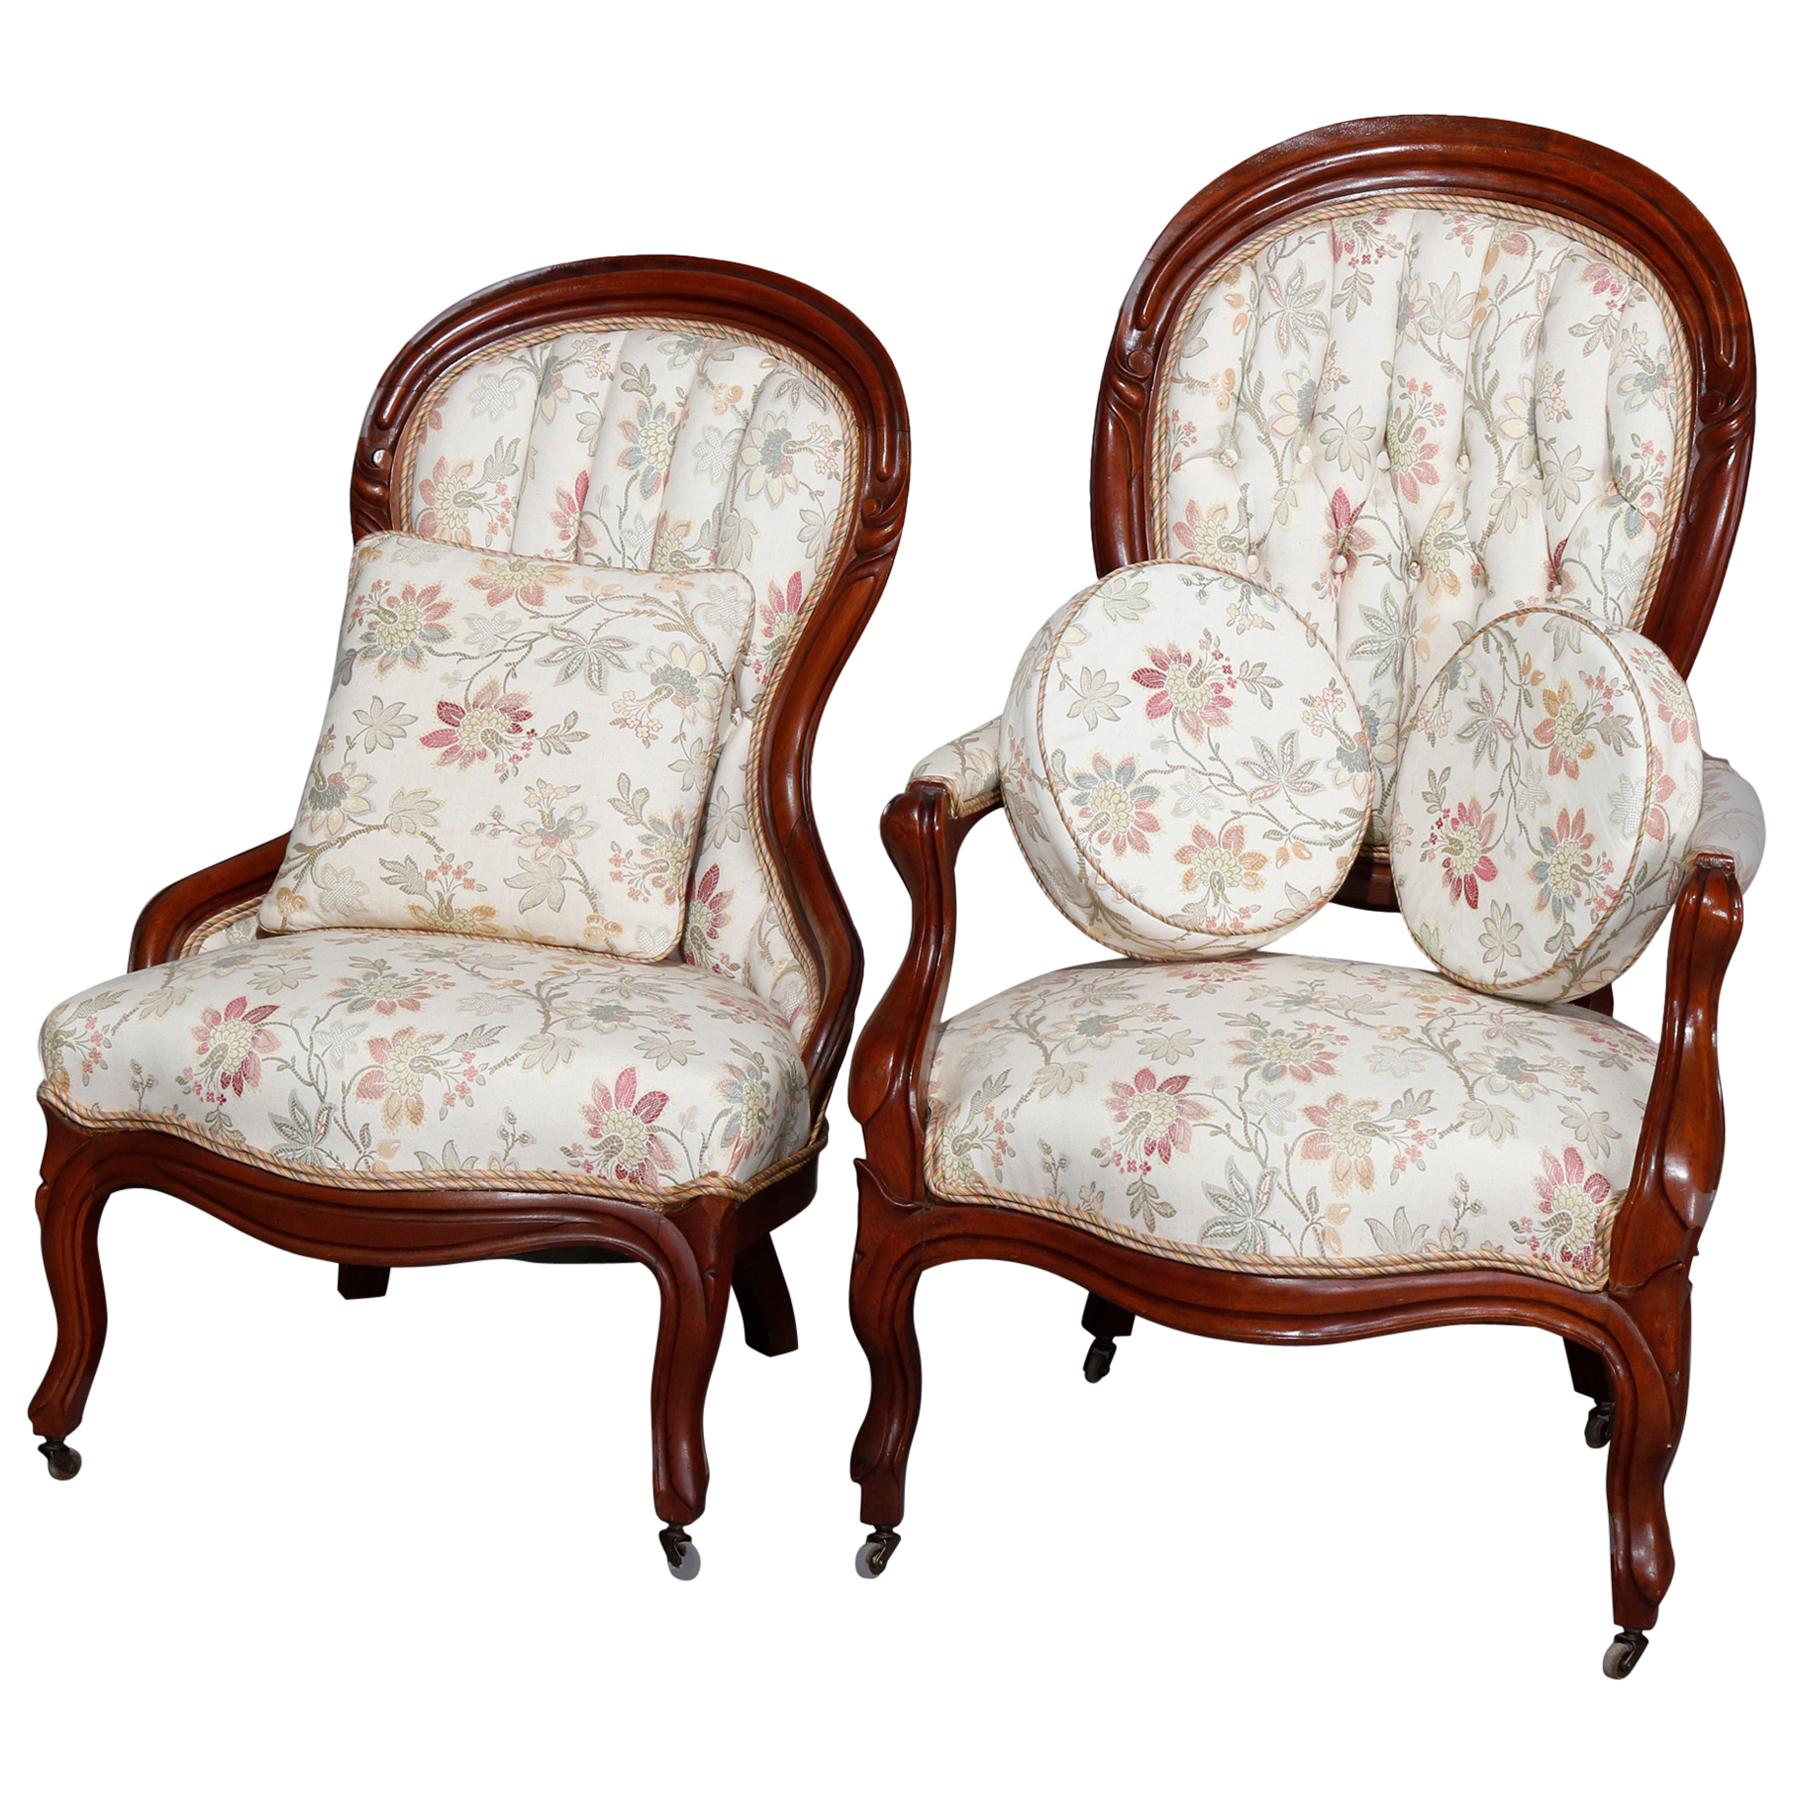 Antique Victorian Carved Walnut Upholstered Parlor Chair Set, circa 1890